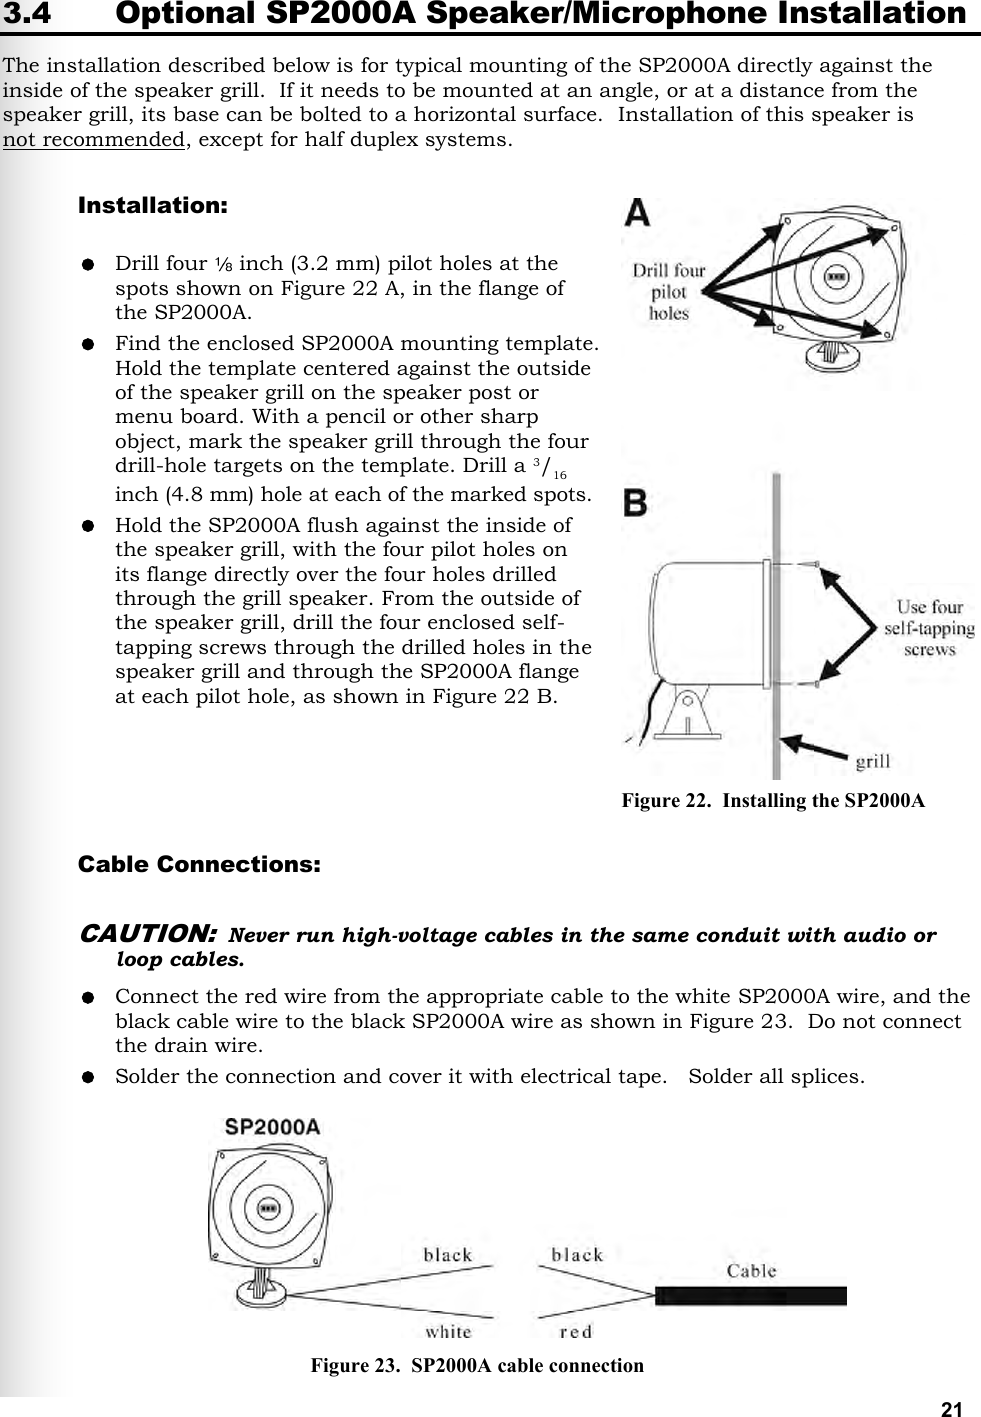   21 3.4 Optional SP2000A Speaker/Microphone Installation The installation described below is for typical mounting of the SP2000A directly against the inside of the speaker grill.  If it needs to be mounted at an angle, or at a distance from the speaker grill, its base can be bolted to a horizontal surface.  Installation of this speaker is  not recommended, except for half duplex systems.  Installation:   Drill four   inch (3.2 mm) pilot holes at the spots shown on Figure 22 A, in the flange of the SP2000A.  Find the enclosed SP2000A mounting template. Hold the template centered against the outside of the speaker grill on the speaker post or menu board. With a pencil or other sharp object, mark the speaker grill through the four drill-hole targets on the template. Drill a 3/16 inch (4.8 mm) hole at each of the marked spots.  Hold the SP2000A flush against the inside of the speaker grill, with the four pilot holes on  its flange directly over the four holes drilled through the grill speaker. From the outside of the speaker grill, drill the four enclosed self- tapping screws through the drilled holes in the speaker grill and through the SP2000A flange at each pilot hole, as shown in Figure 22 B.     Cable Connections:  CAUTION: Never run high-voltage cables in the same conduit with audio or loop cables.  Connect the red wire from the appropriate cable to the white SP2000A wire, and the black cable wire to the black SP2000A wire as shown in Figure 23.  Do not connect the drain wire.    Solder the connection and cover it with electrical tape.   Solder all splices.         Figure 22.  Installing the SP2000A Figure 23.  SP2000A cable connection 